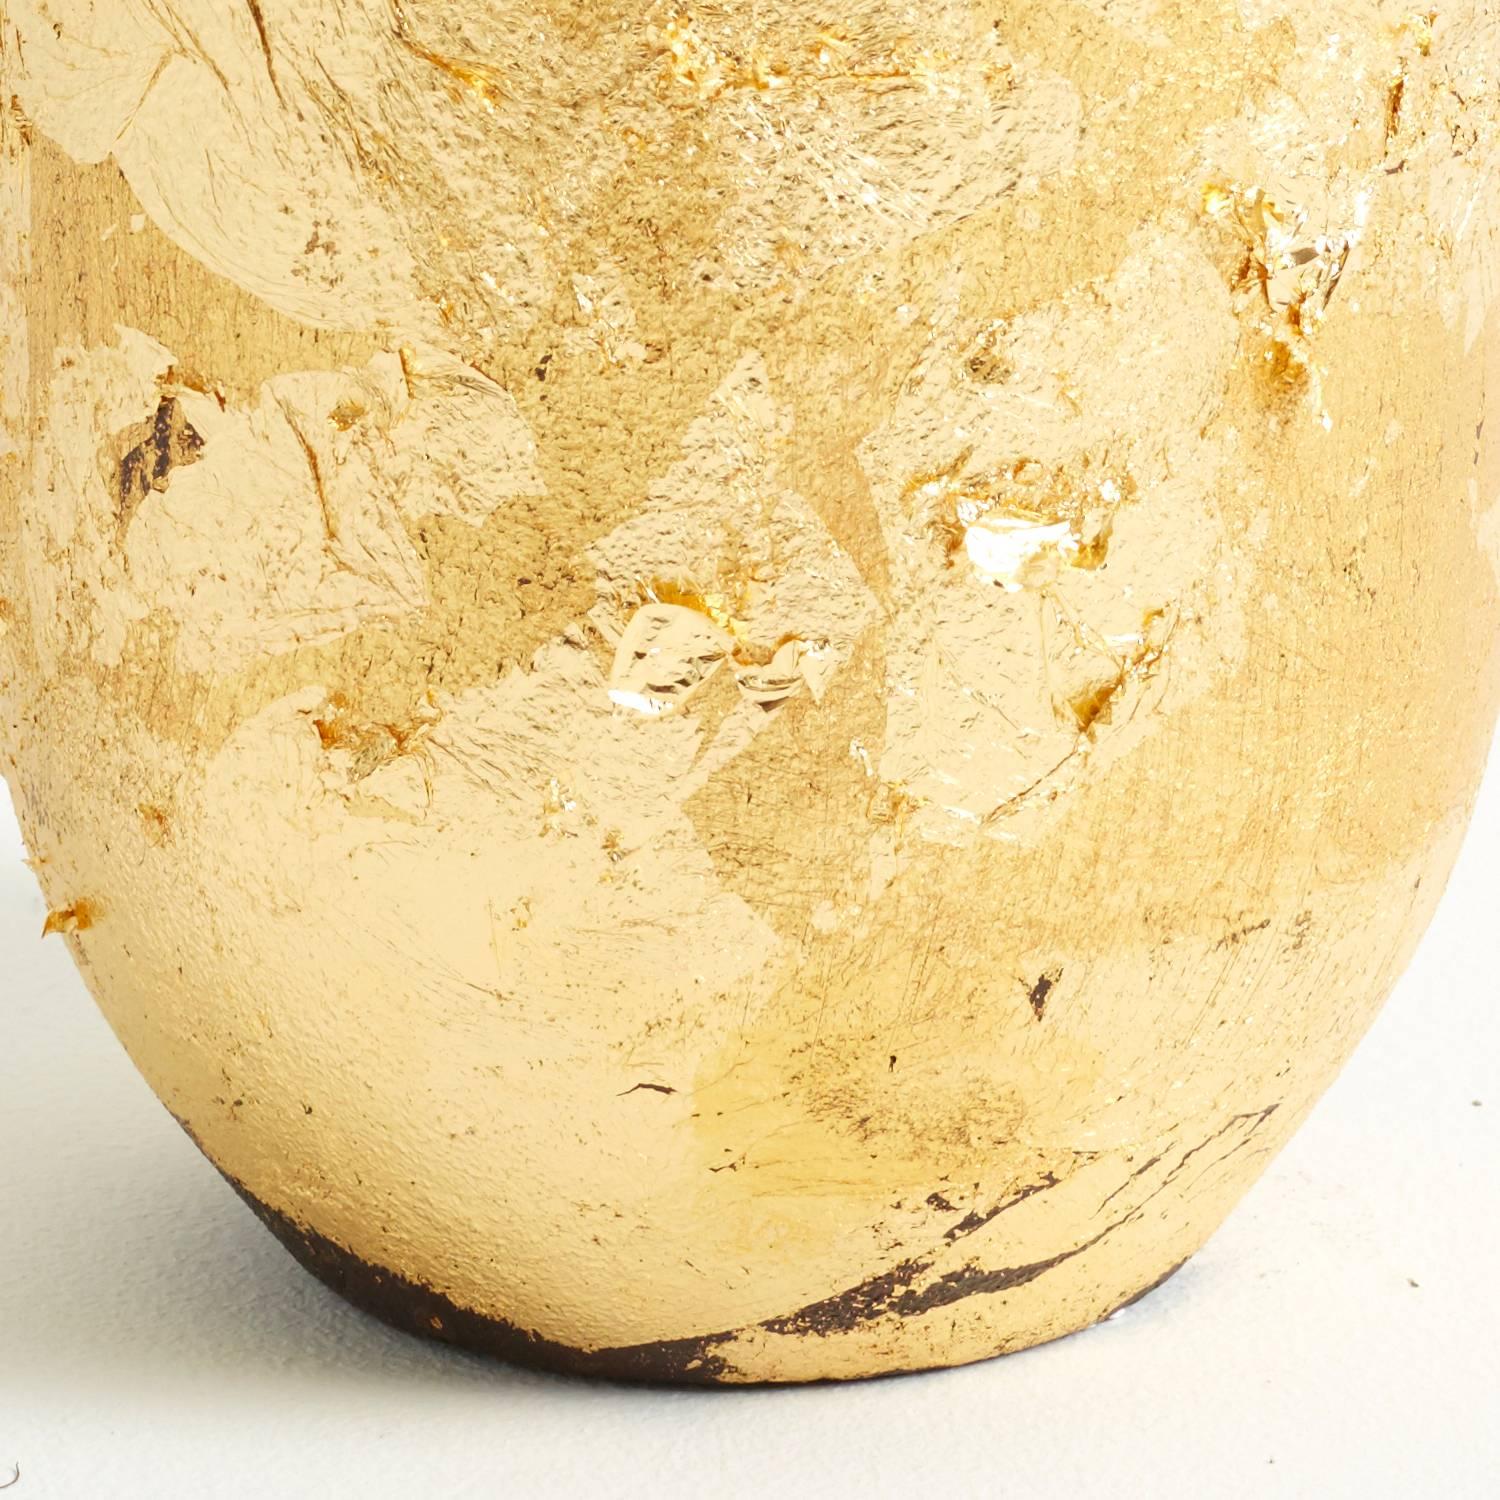 British Handmade Unique Gold Leaf and Cast Iron Decorative Vessel by Grant McCaig